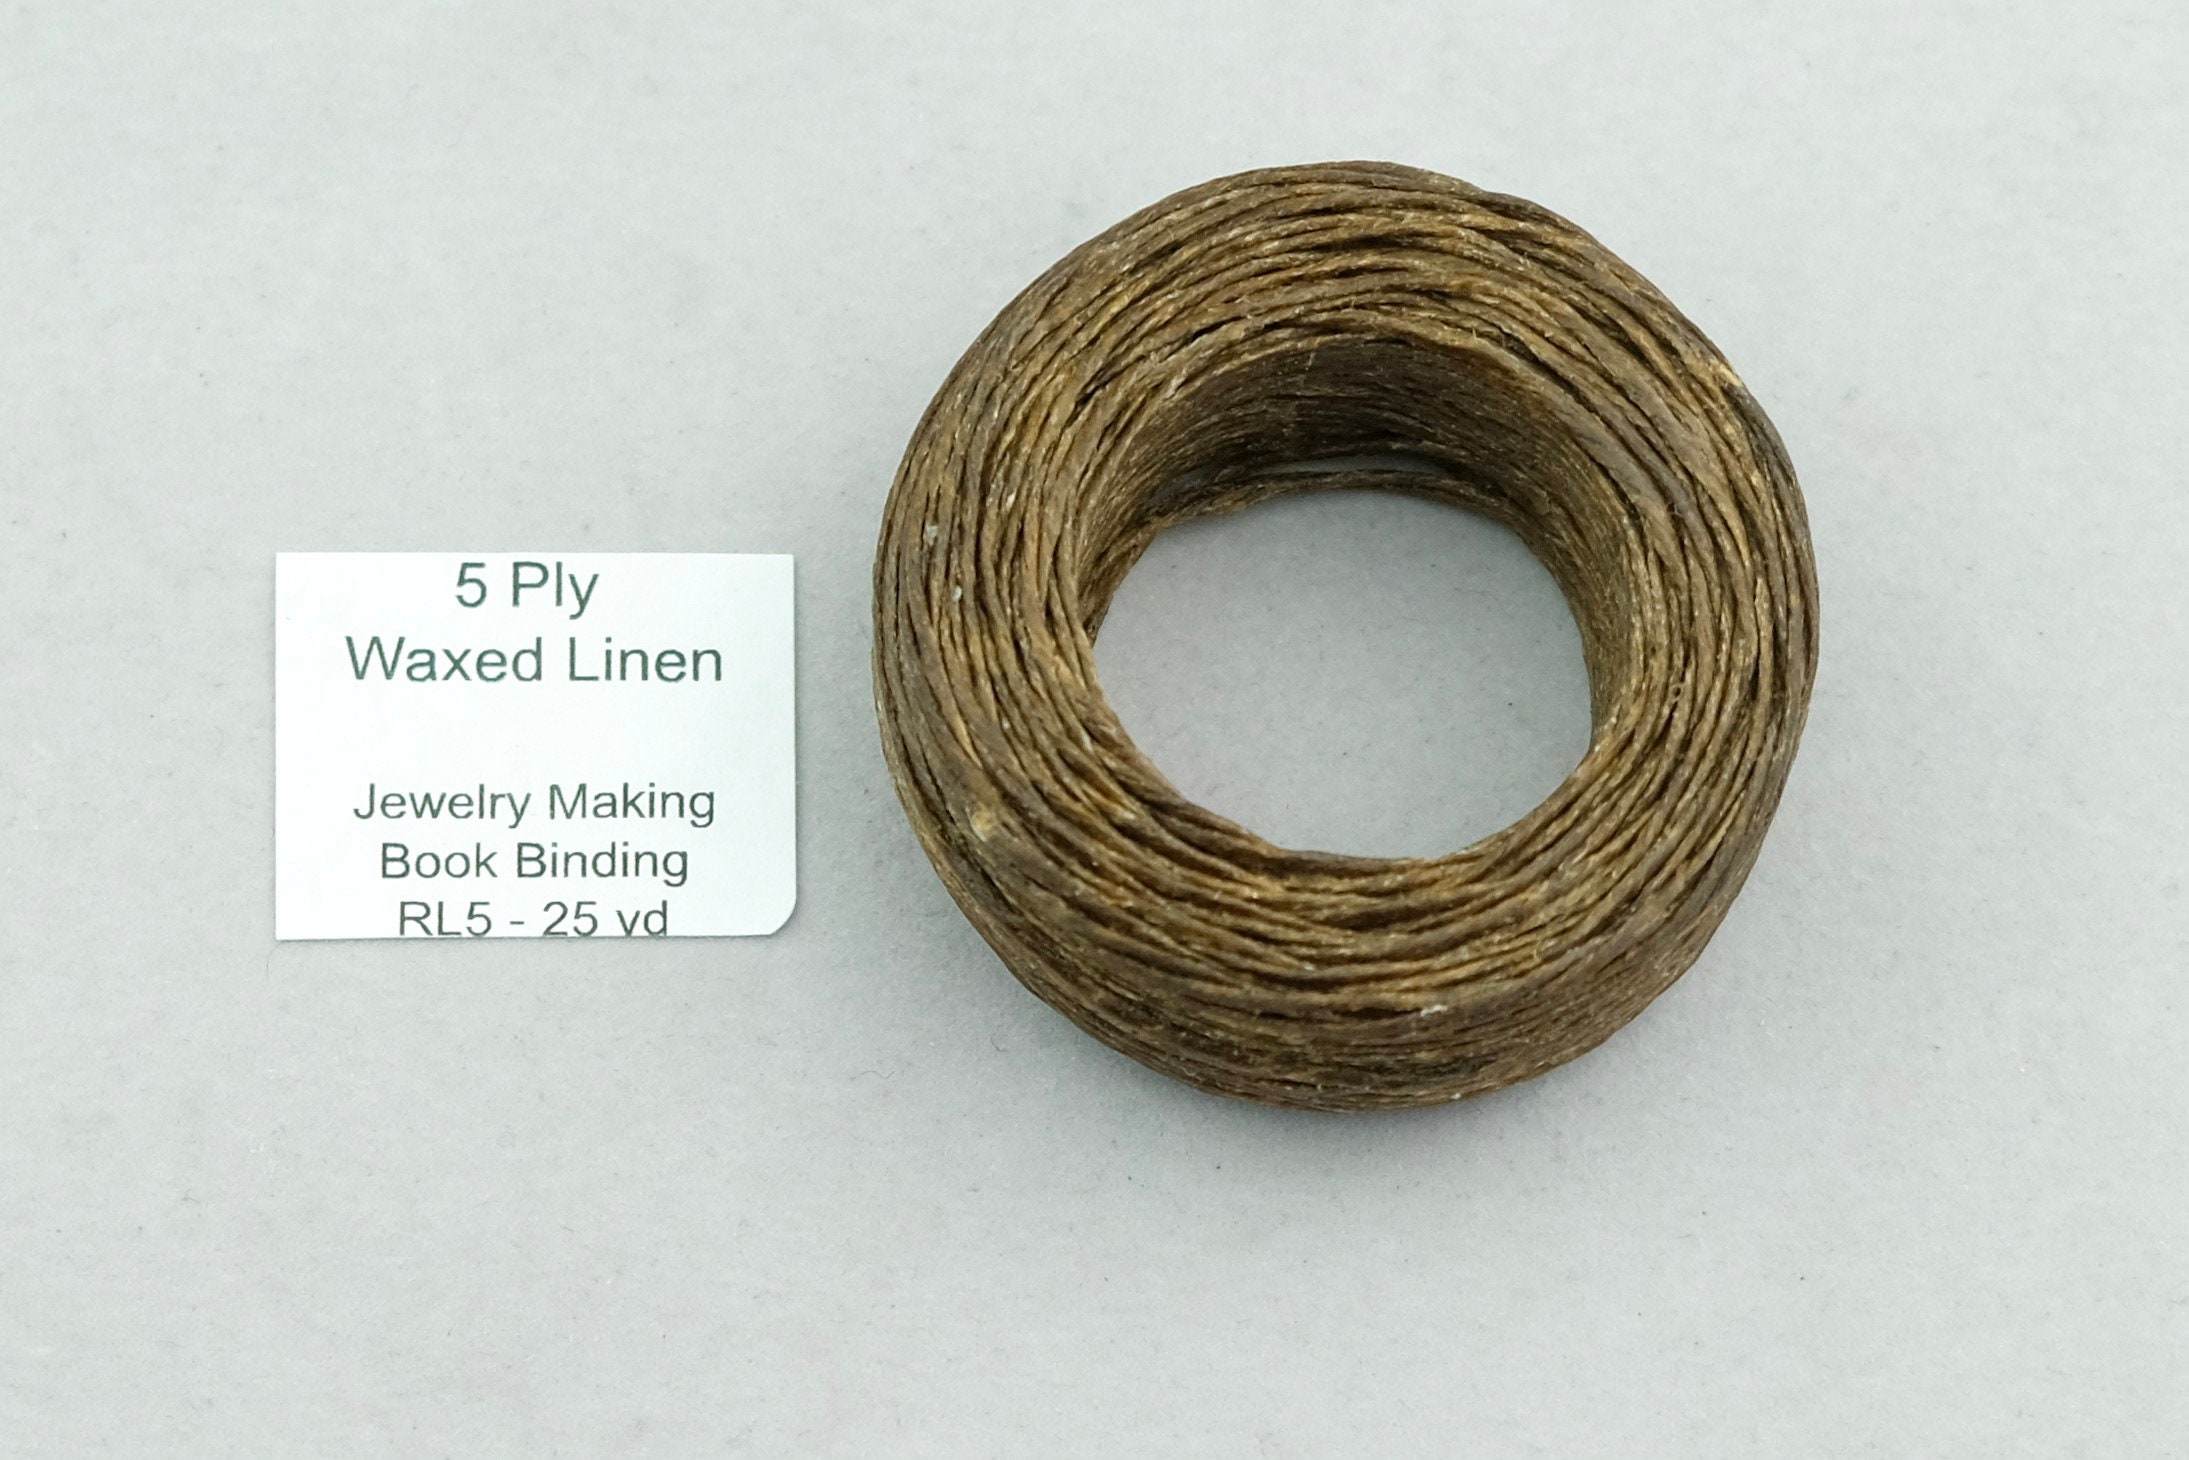 Waxed Braided Waxed Polycord 210 Feet- Maine Thread Co. – Maker's Leather  Supply